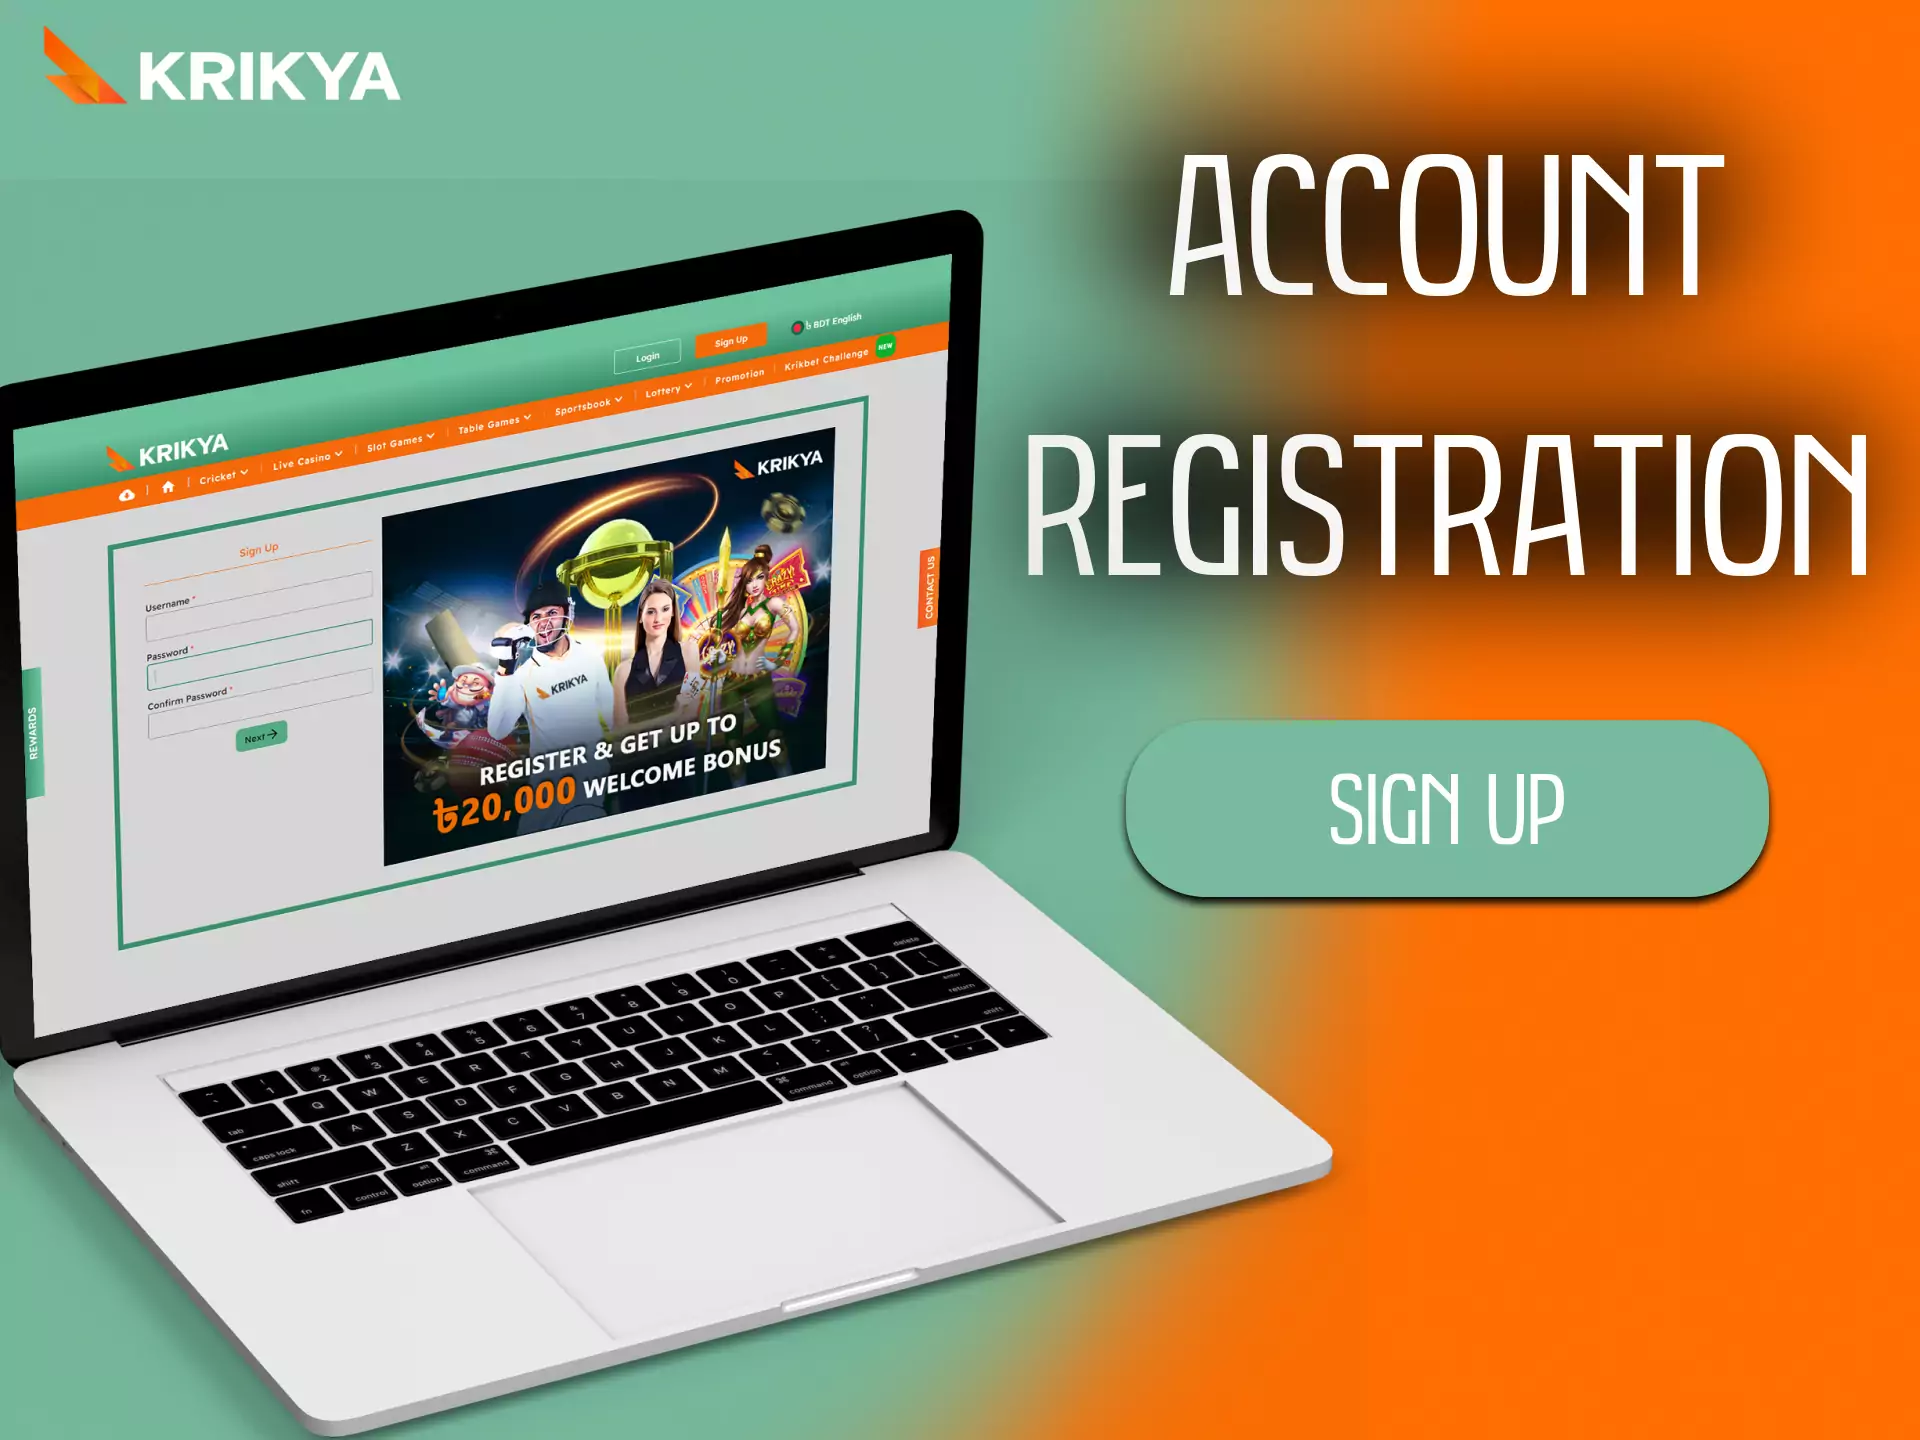 Go through a simple and quick registration on Krikya to place bets.